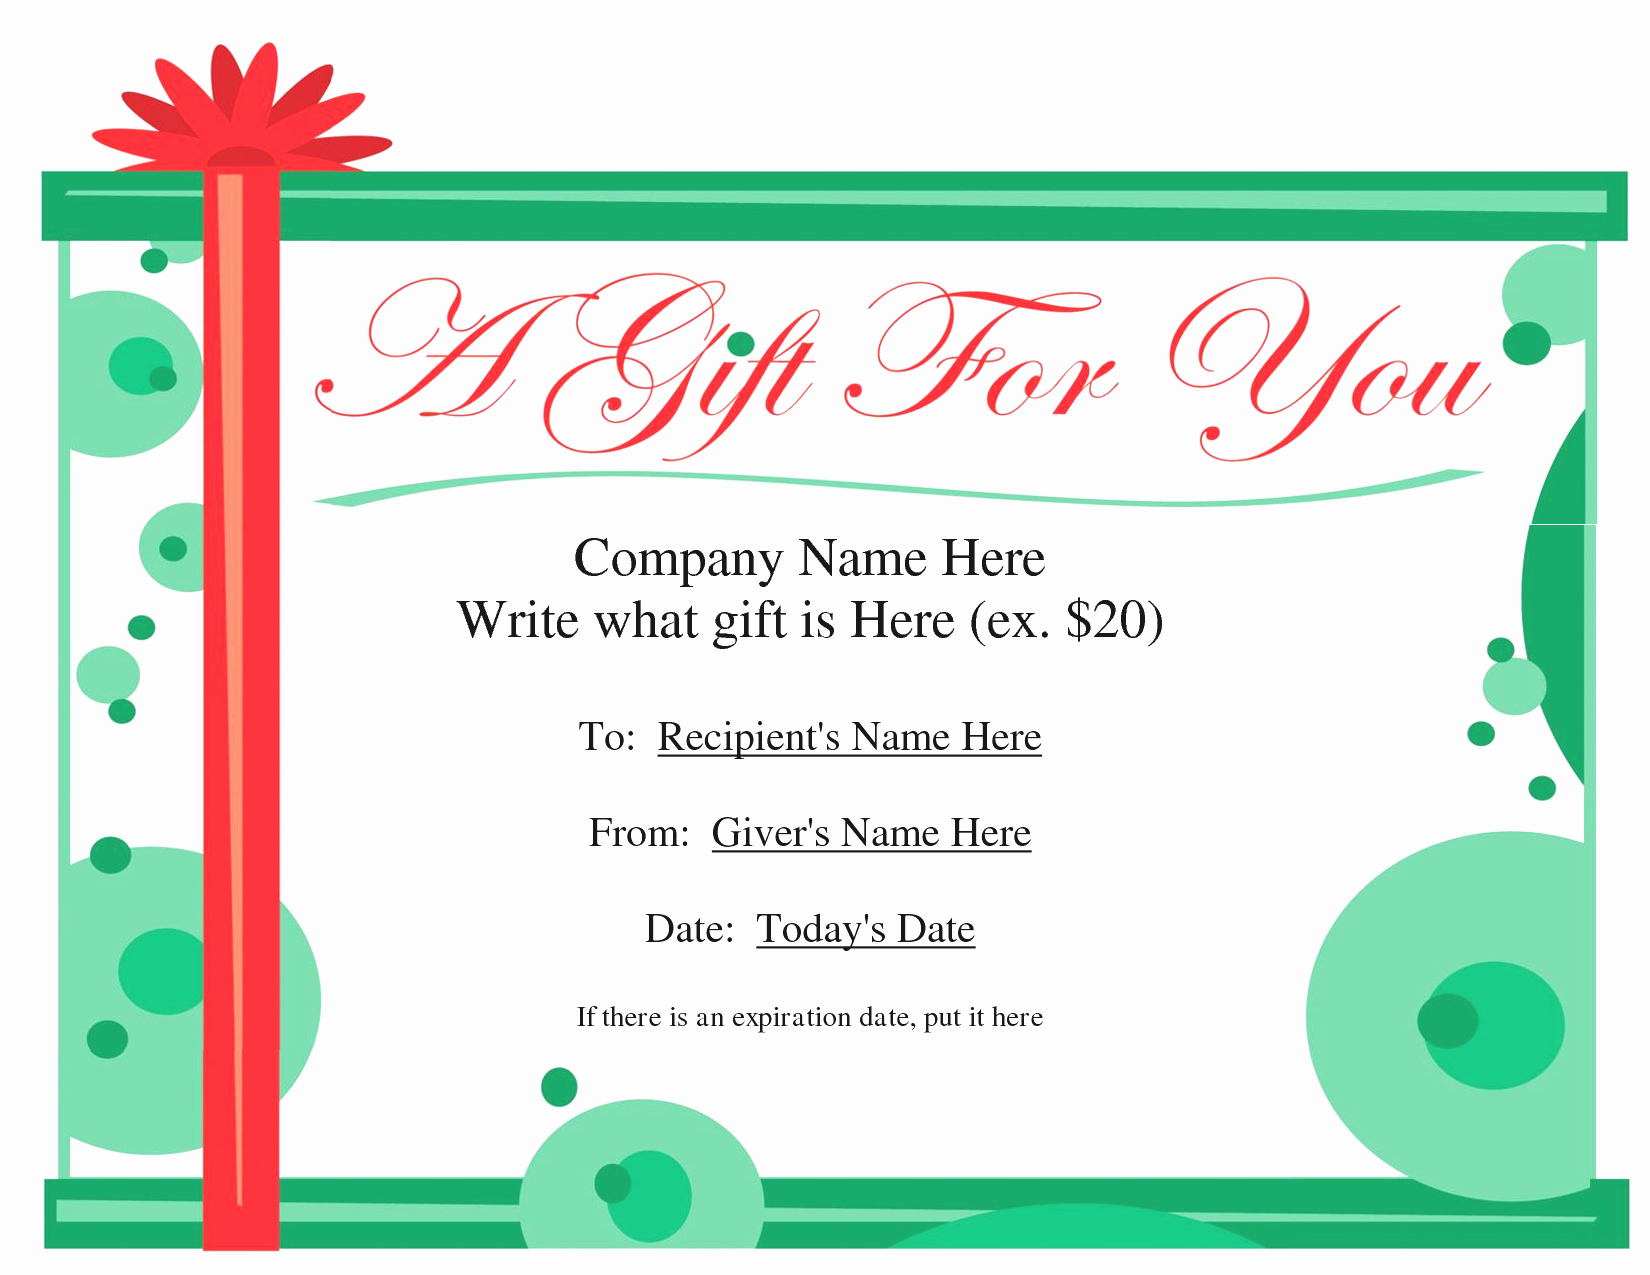 Gift Certificate Template Microsoft Word Beautiful Microsoft Fice Gift Certificate Template